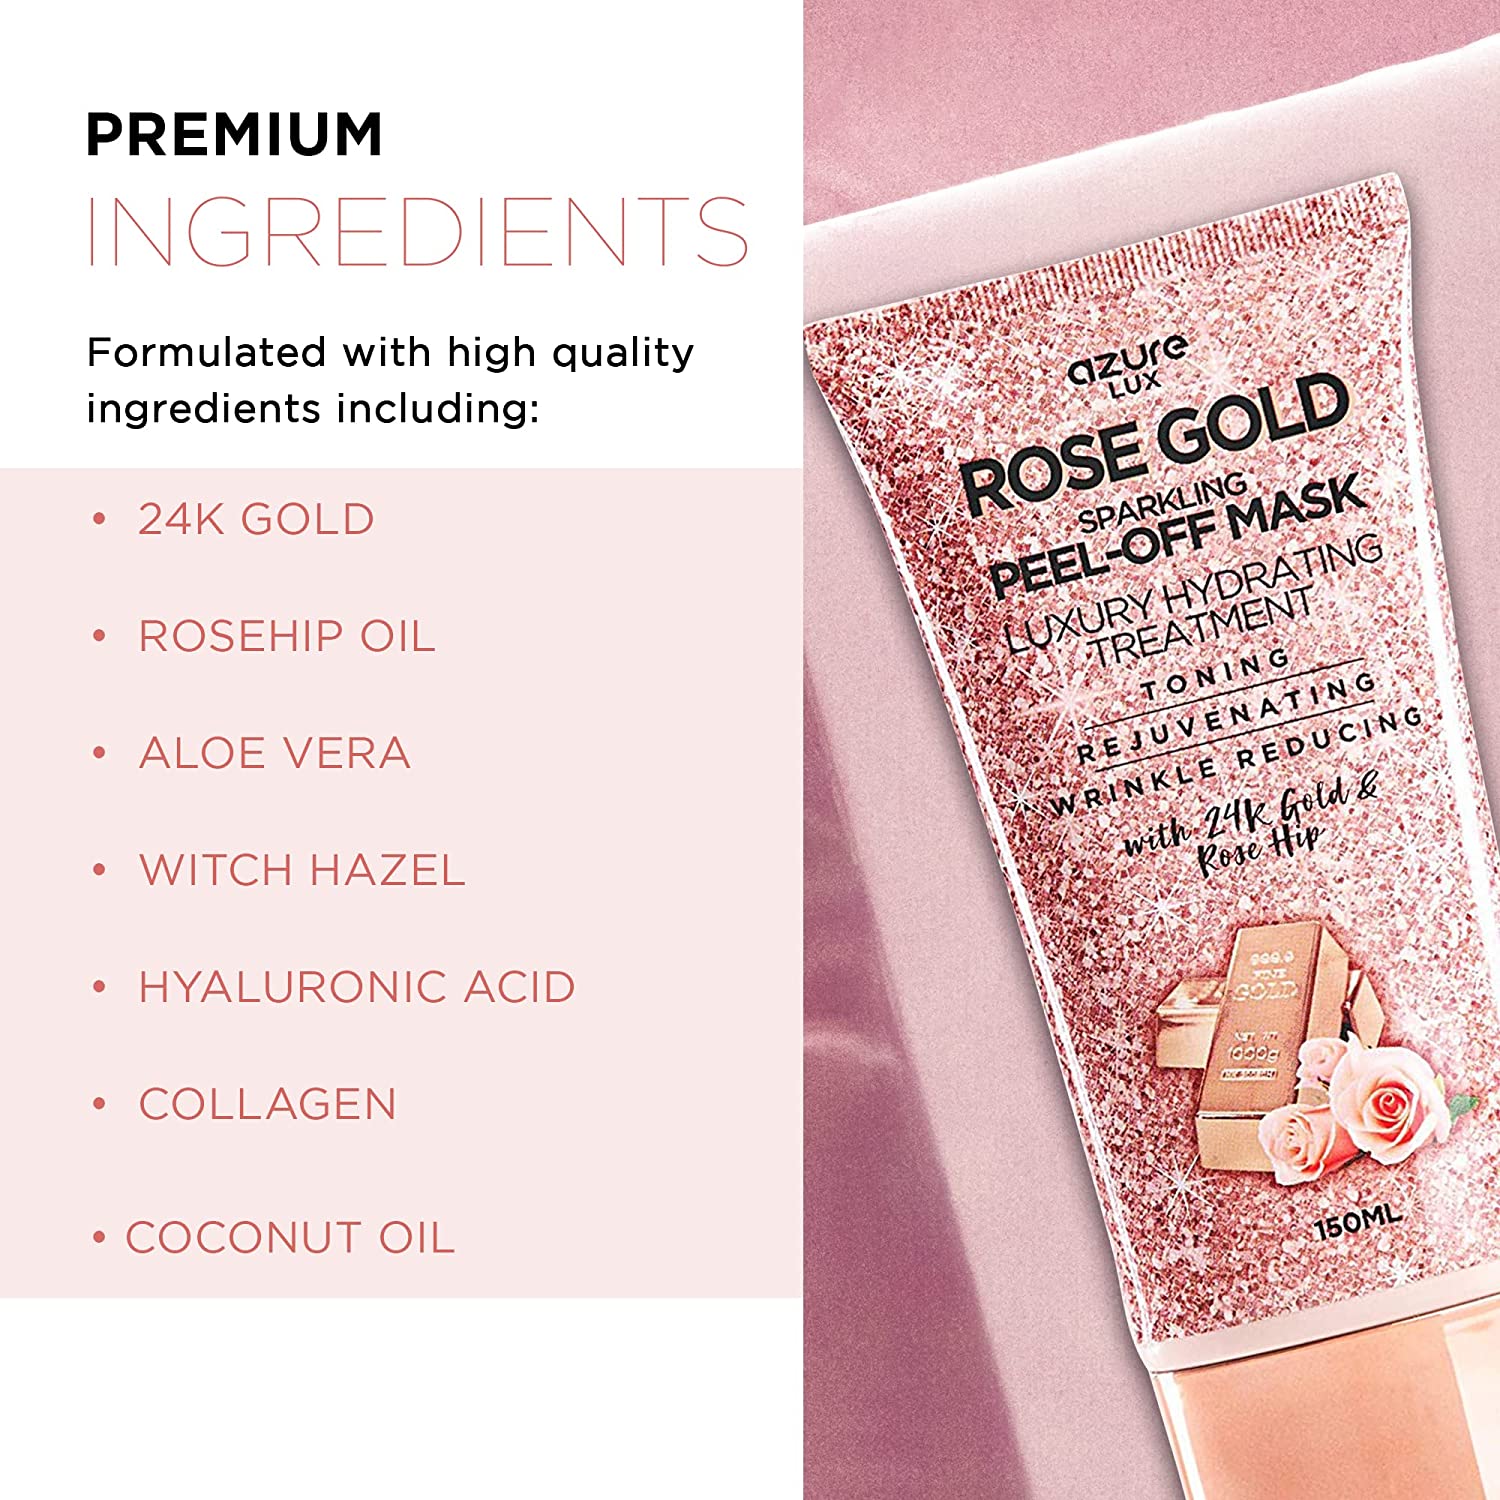 AZURE Rose Gold Hydrating Peel Off Face Mask- Anti Aging, Toning & Rejuvenating - Removes Blackheads, Dirt & Oils - With 24K Gold and Rose Hip Oil - Skin Care Made in Korea - 150mL / 5.07 fl.oz. - image 2 of 6